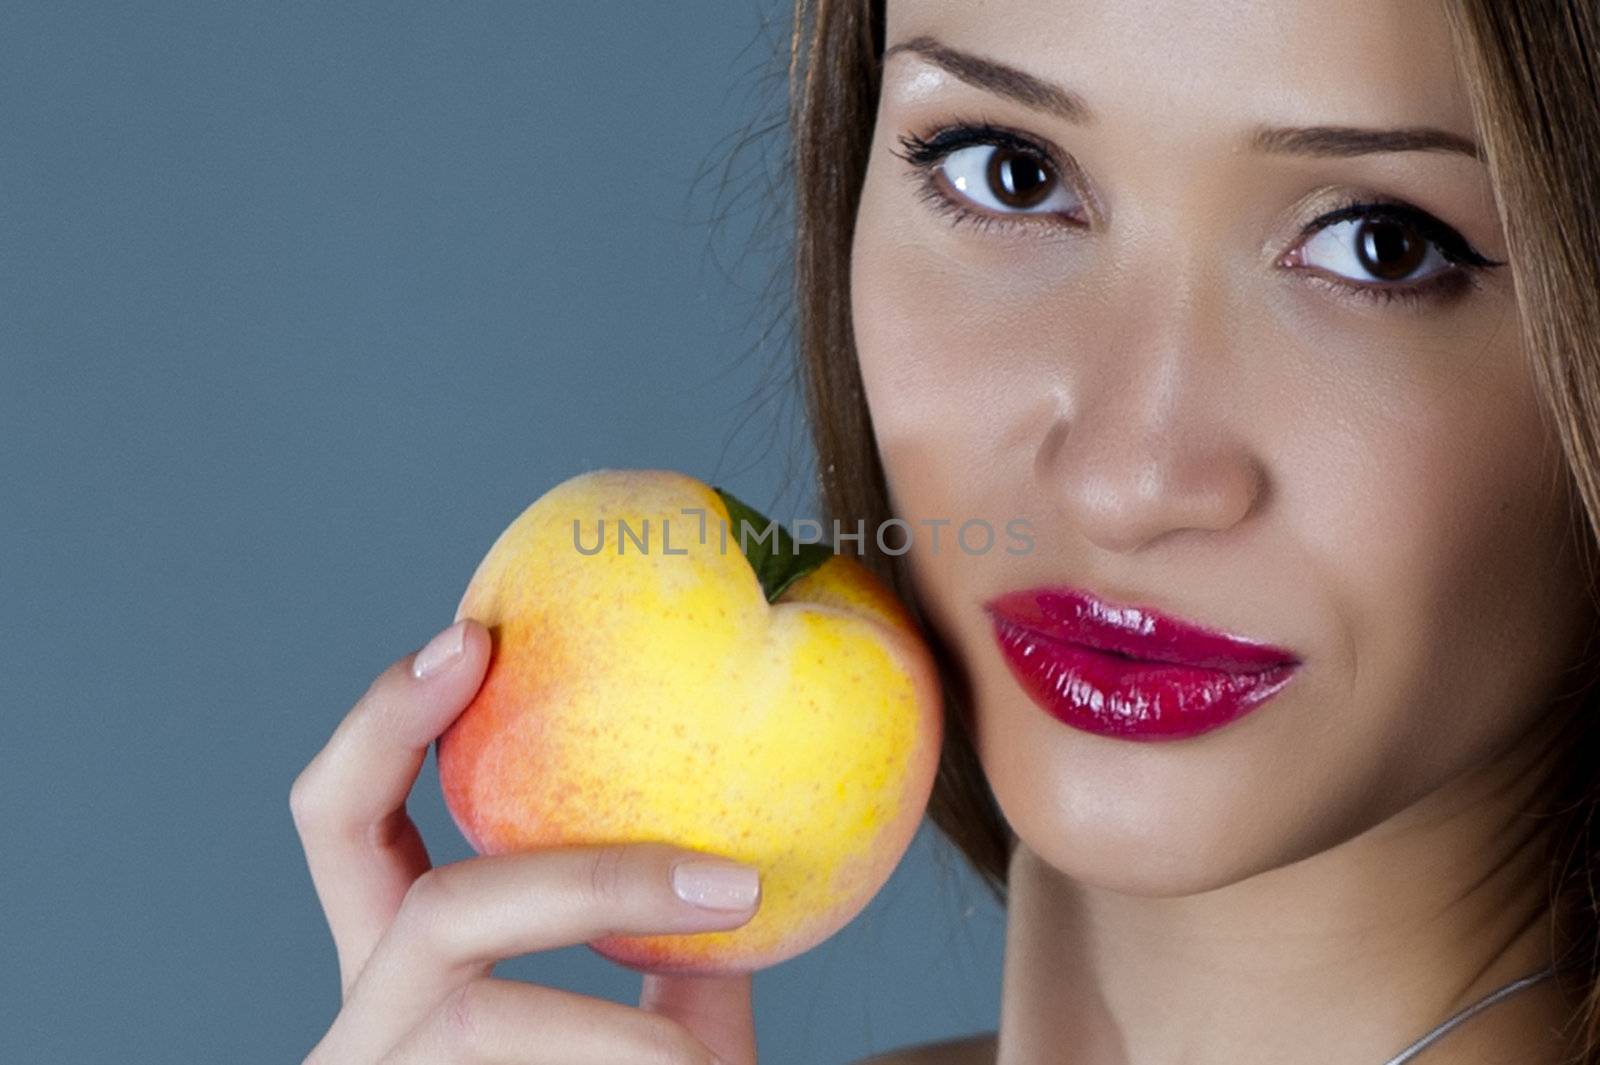 Sexual model with a peach by Aleksandr